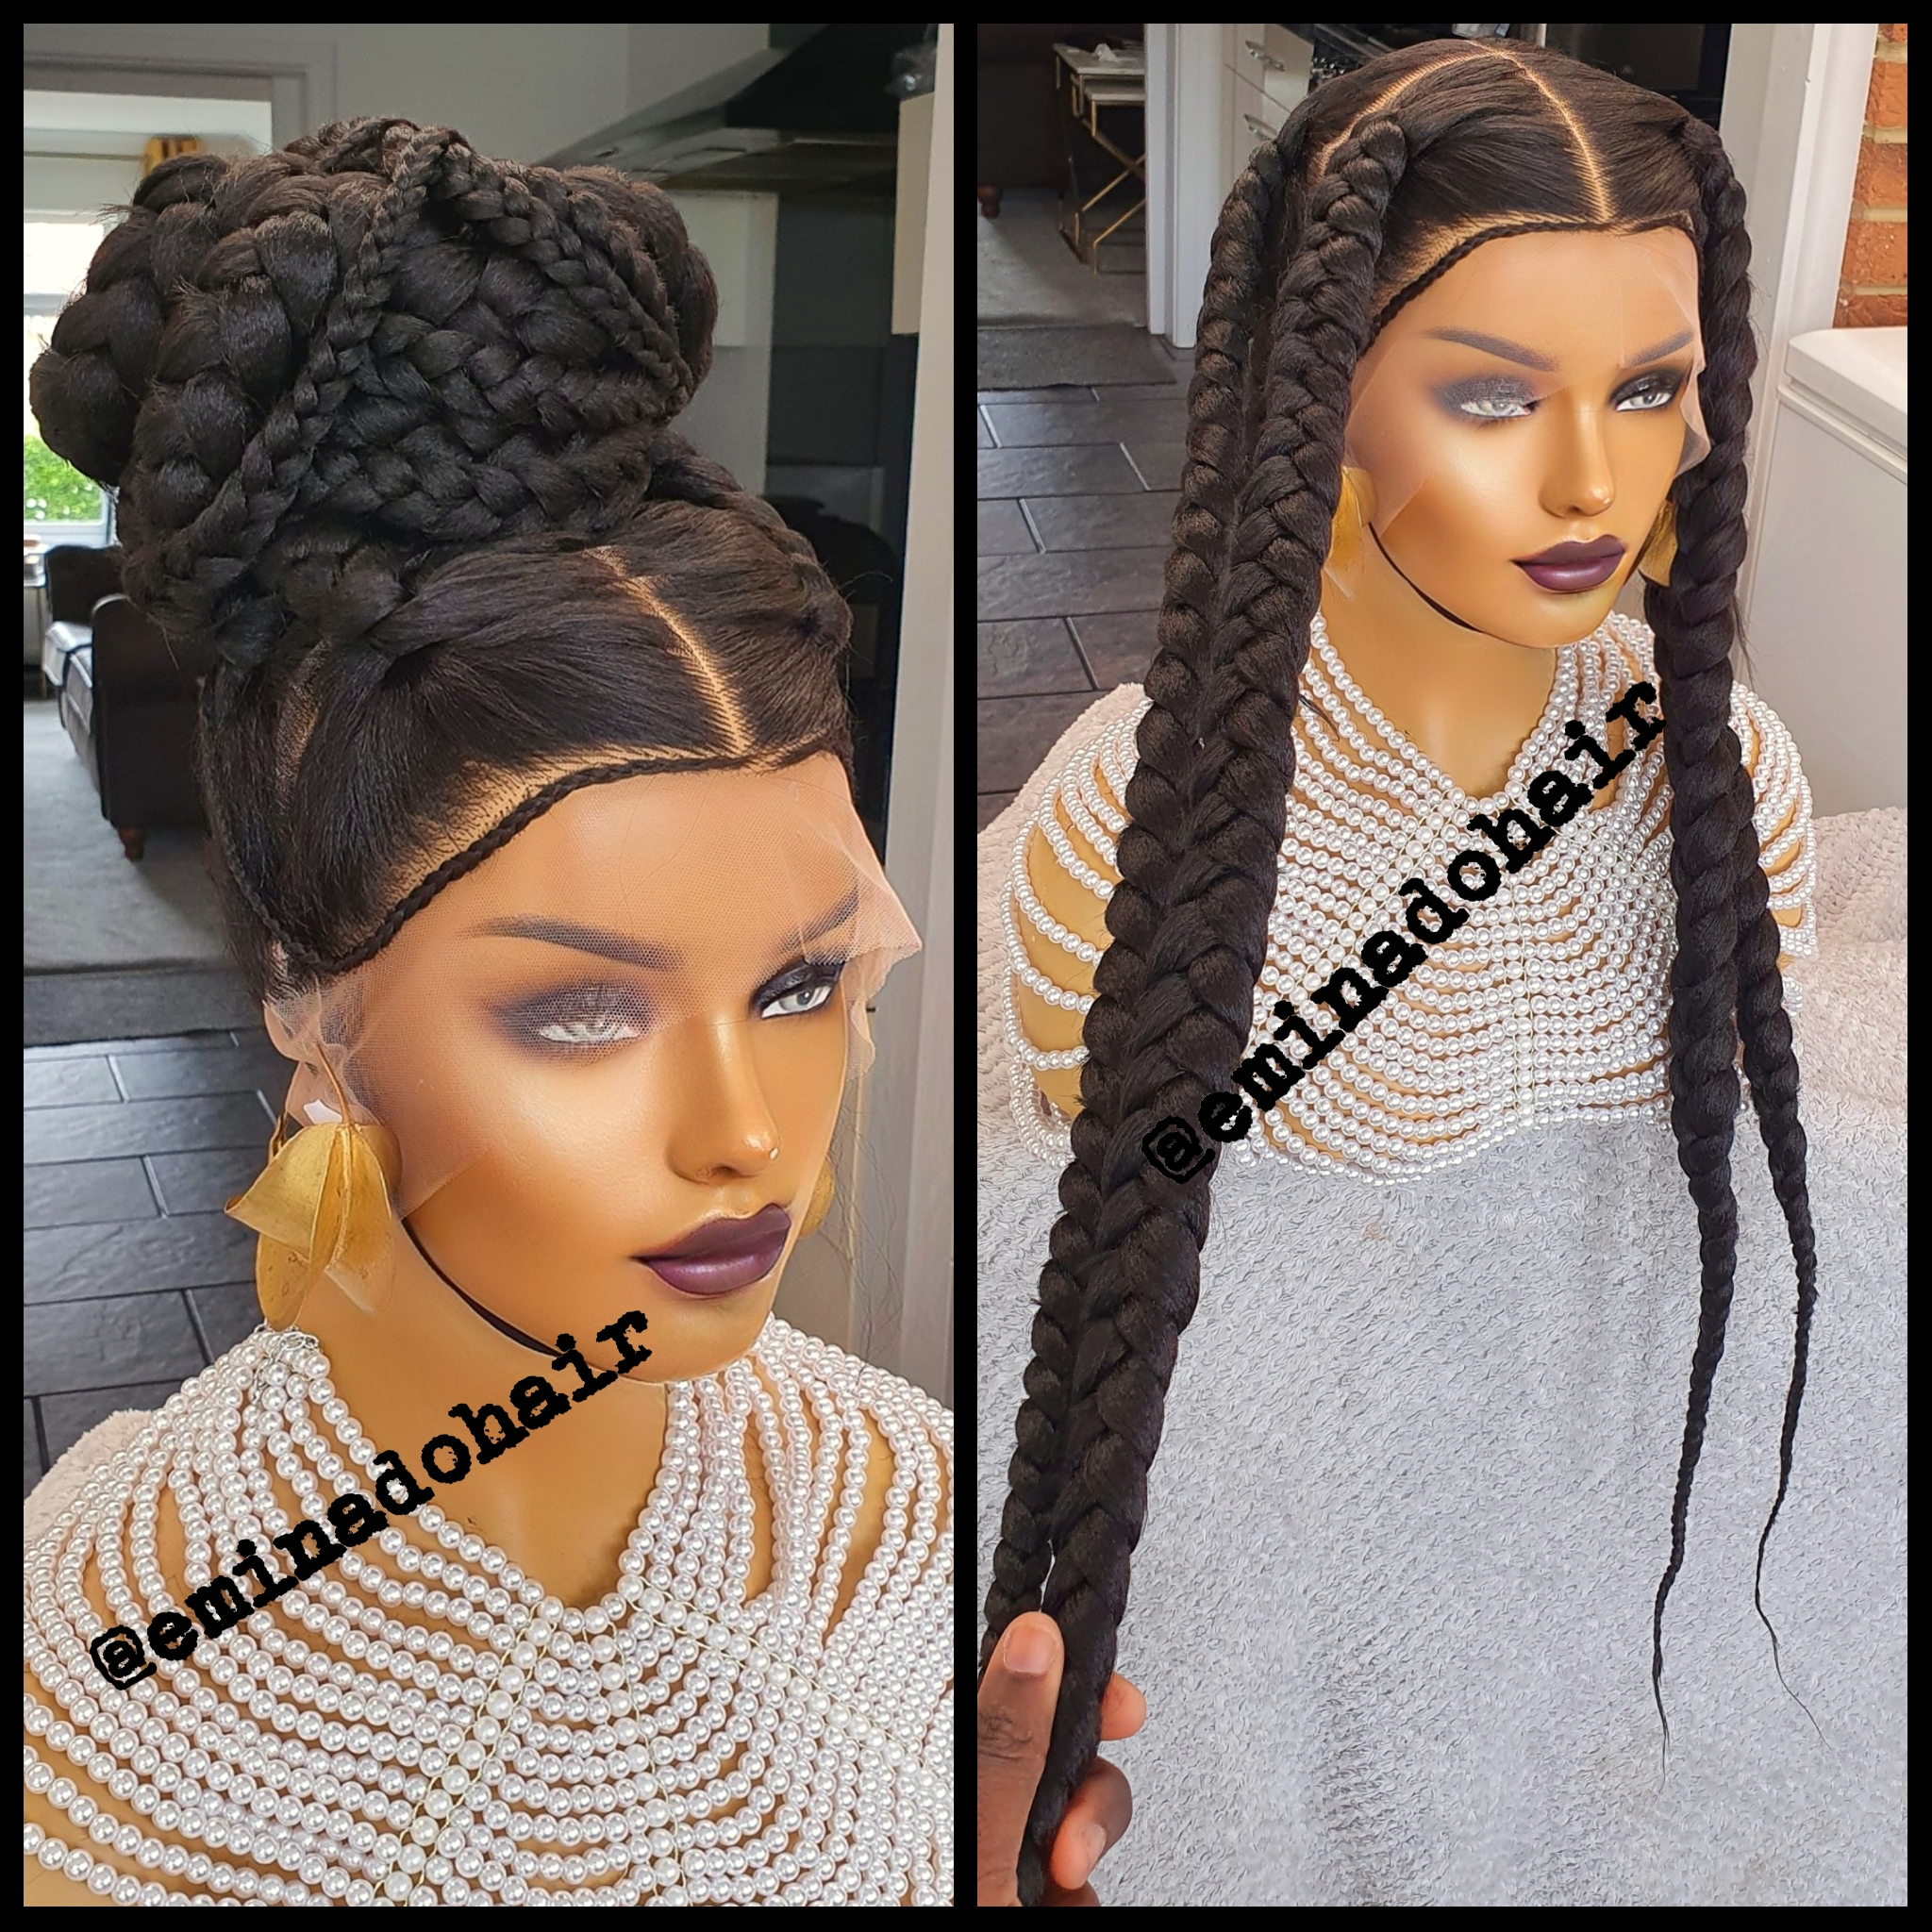 The 6 Pieces Black Box Braided Wig